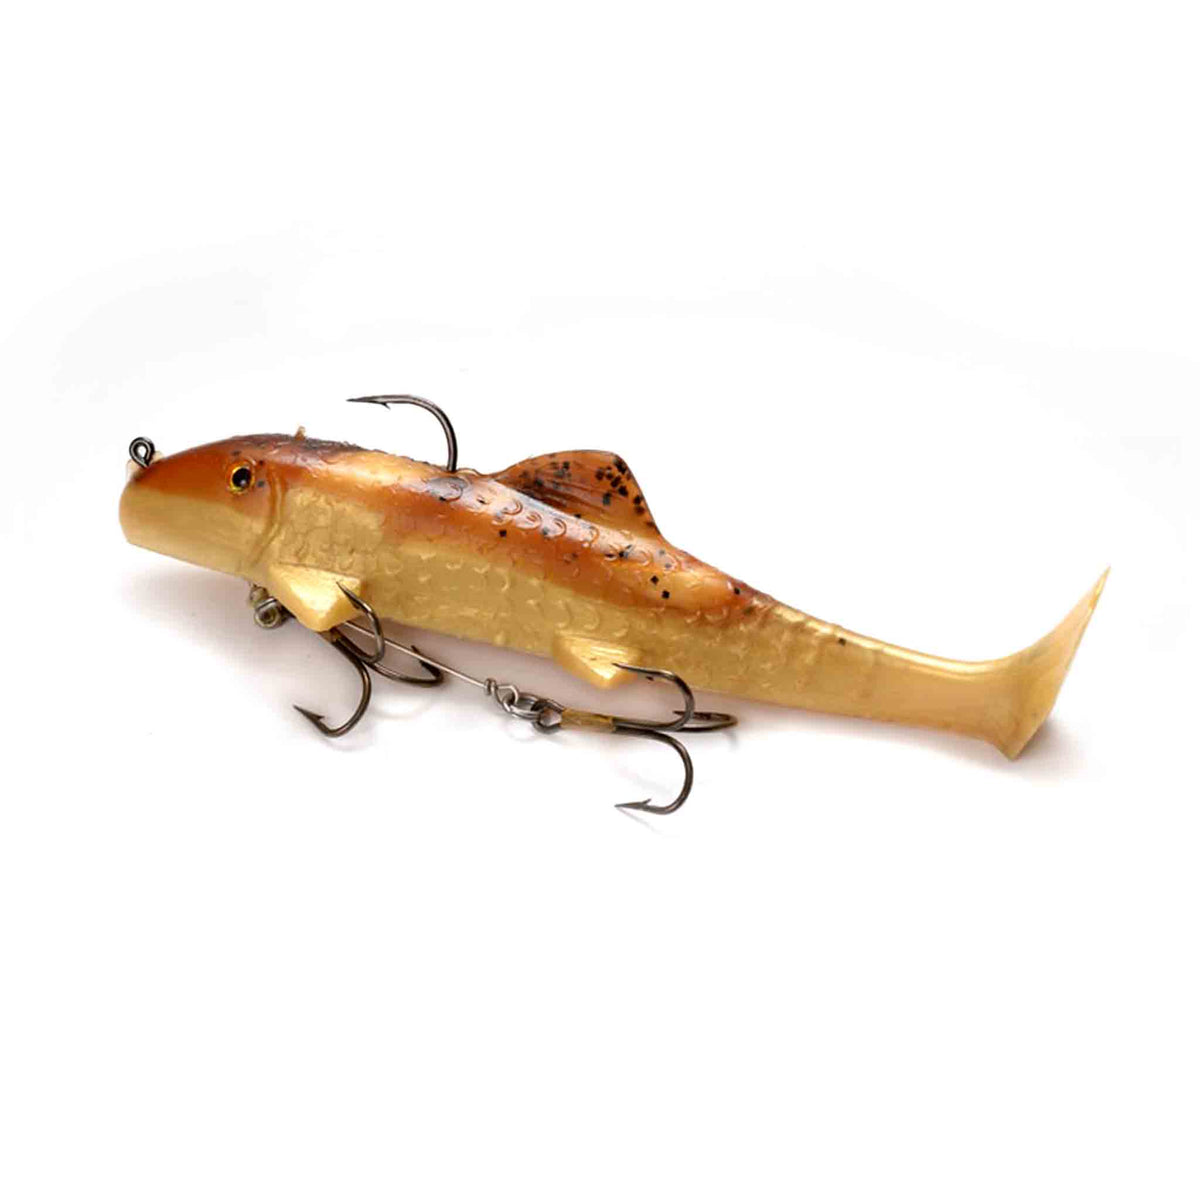 View of Rubber Suick Suzy Sucker 9" Swimbait Dirty Walleye available at EZOKO Pike and Musky Shop